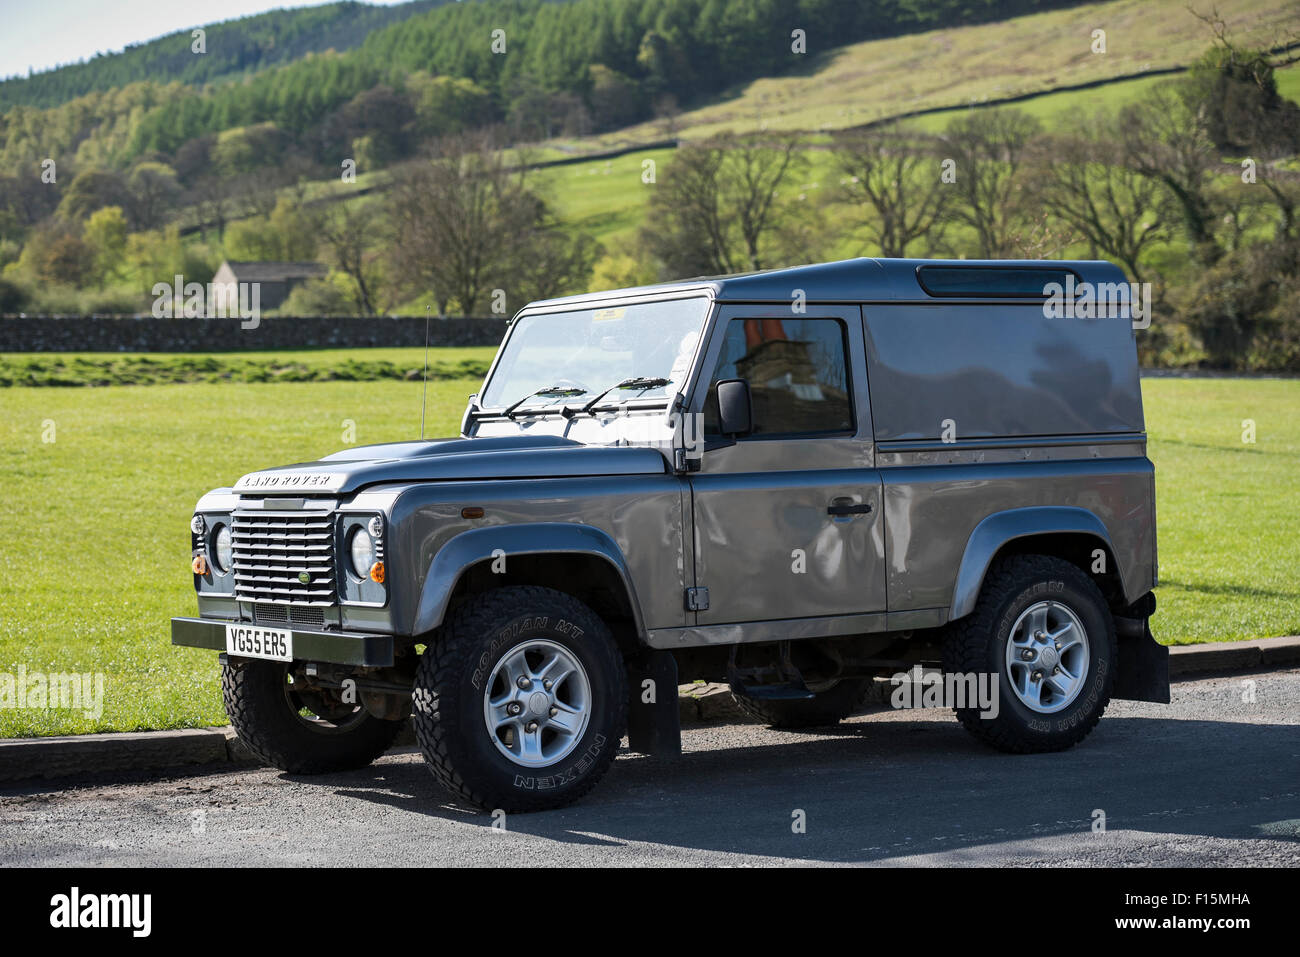 Clean, shiny, grey, hard top Land Rover Defender (iconic, rugged 4x4 vehicle) parked in sunny spot on a Yorkshire Dales road - Burnsall, England, UK. Stock Photo